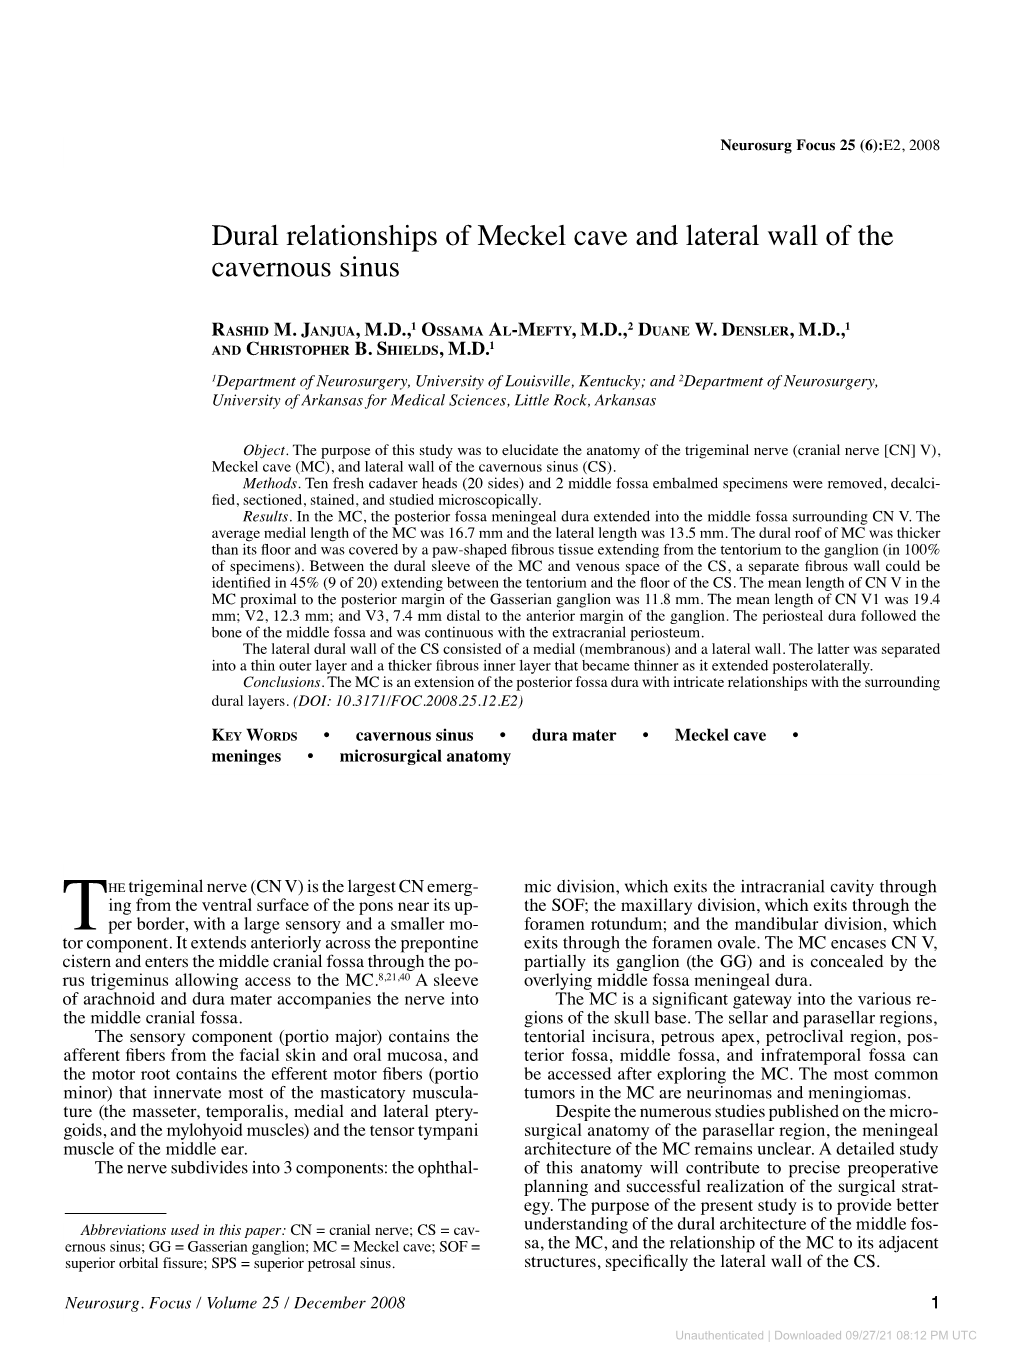 Dural Relationships of Meckel Cave and Lateral Wall of the Cavernous Sinus